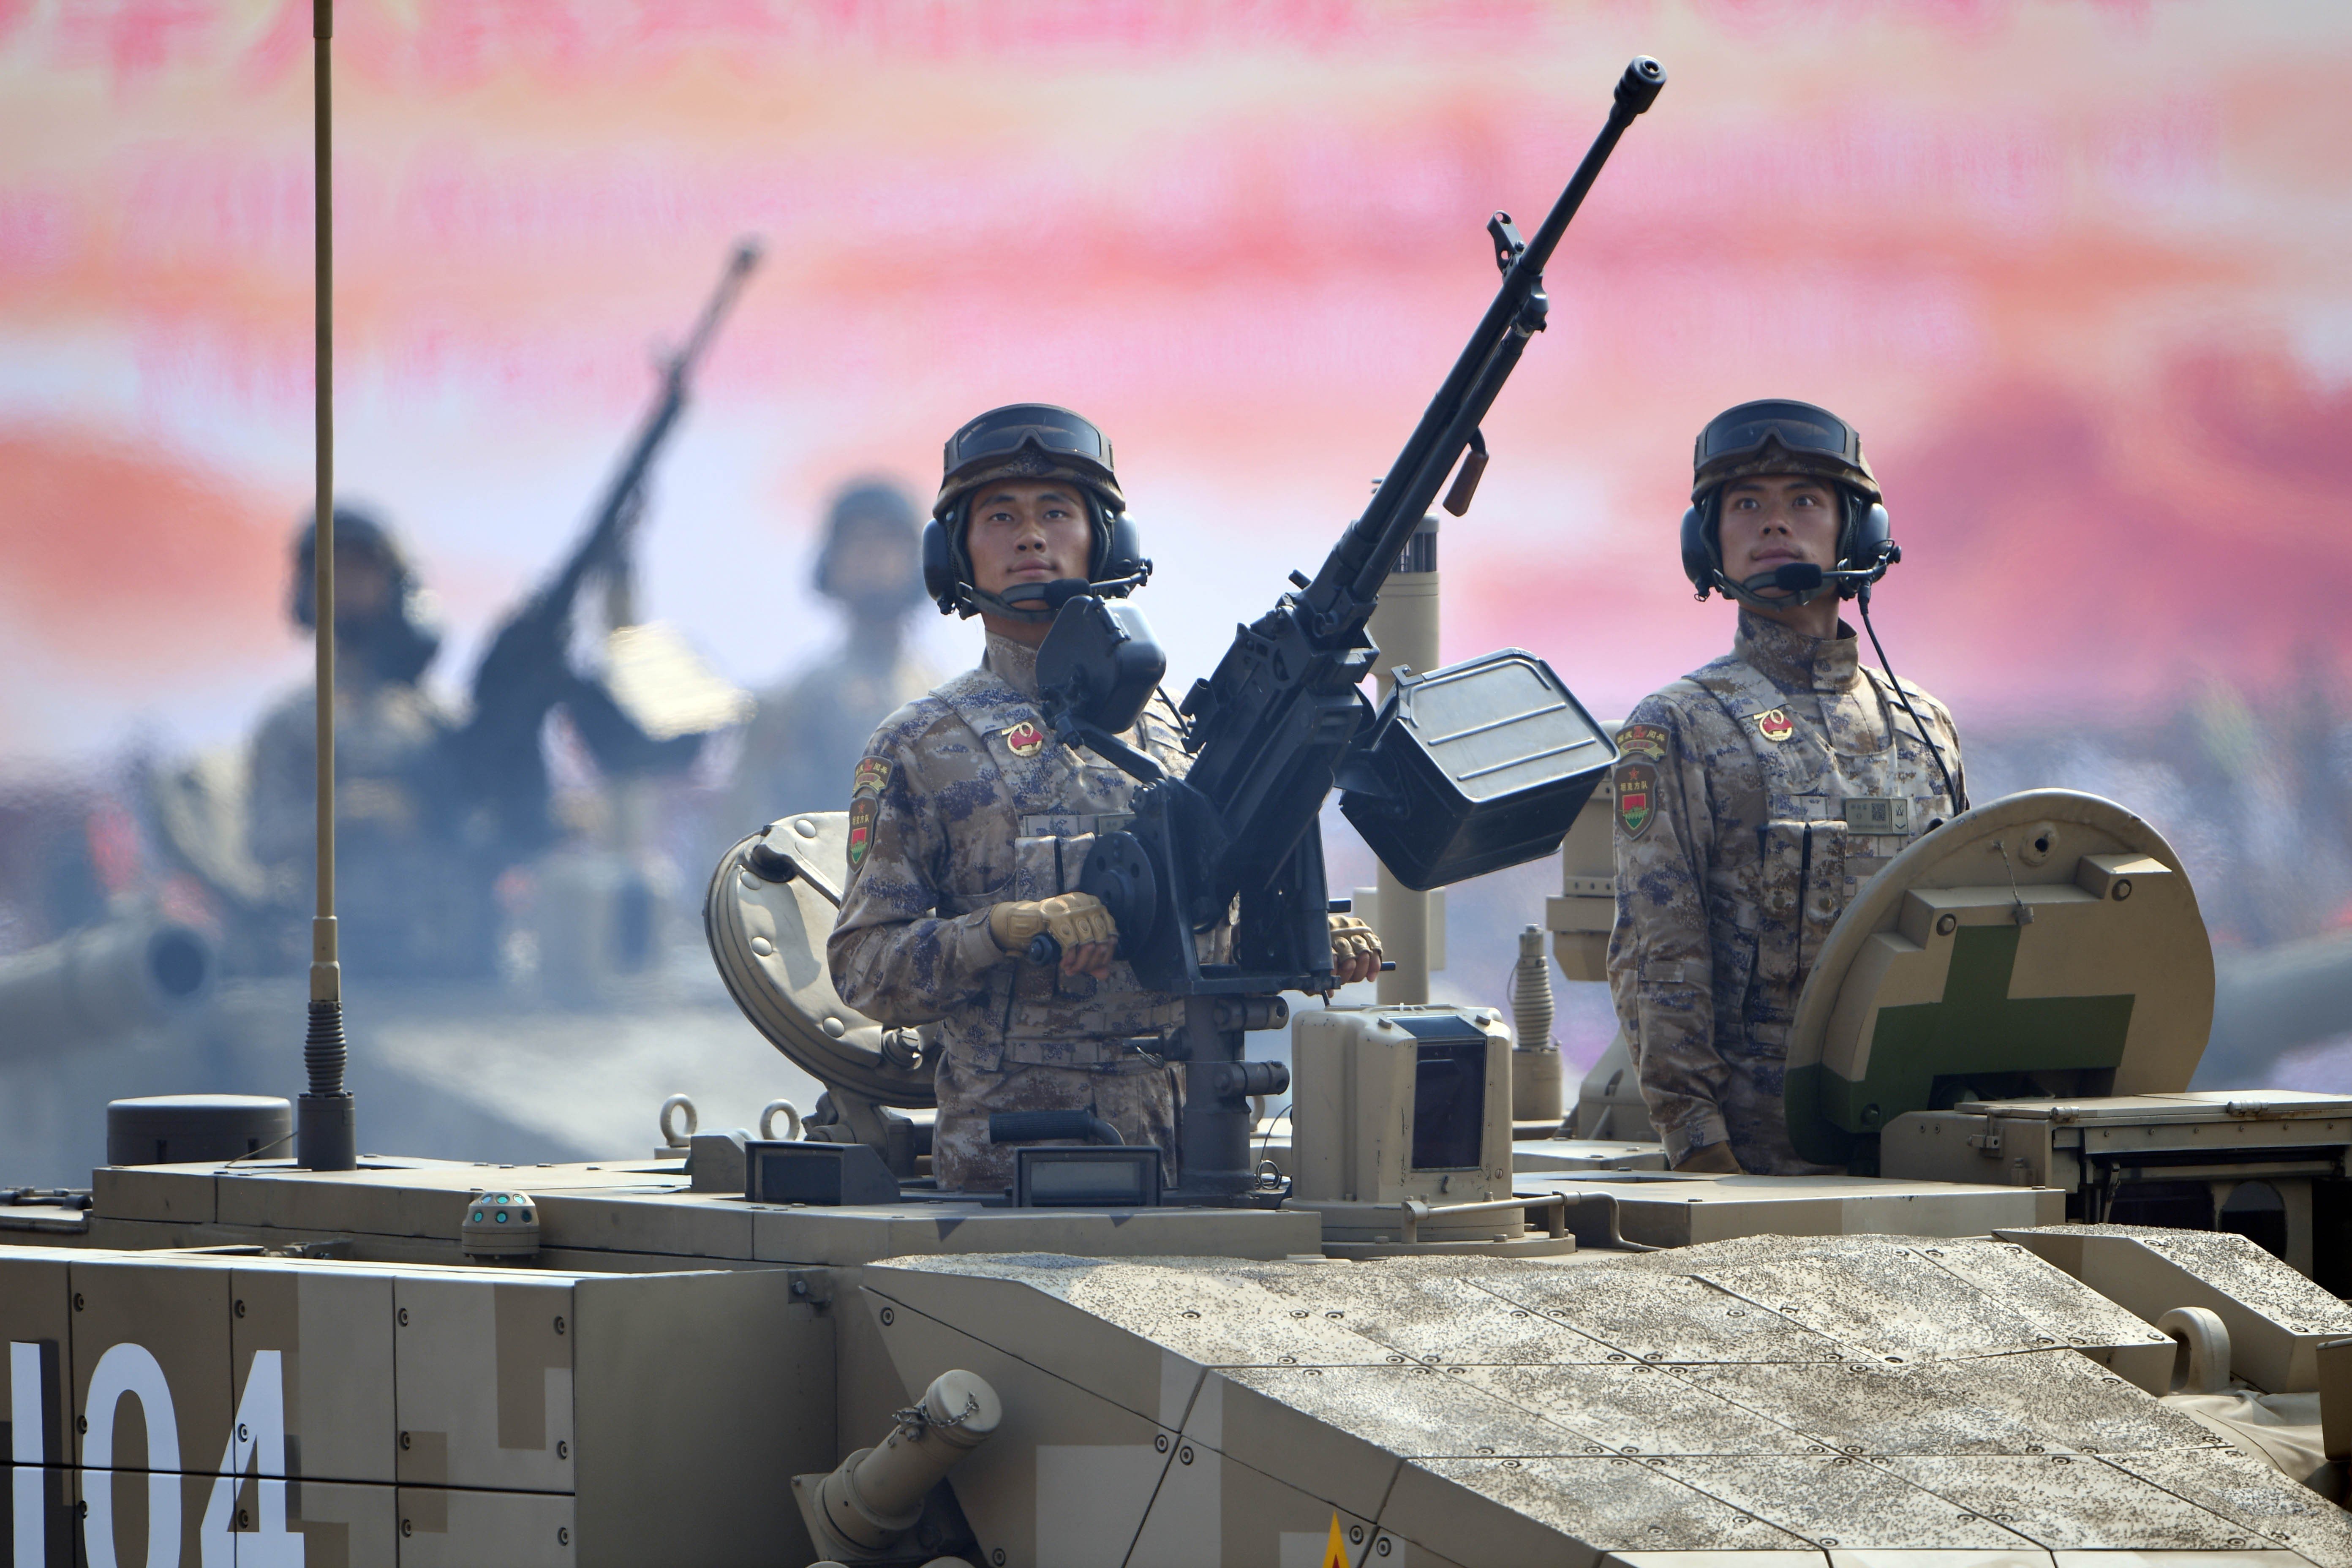 Troops take part in a military parade on China’s National Day on October 1. The parade featured some of the People’s Liberation Army’s most sophisticated arsenal – a show of power that would not go down well with the many already rankled by Beijing’s growing assertiveness on the global stage. Photo: Xinhua